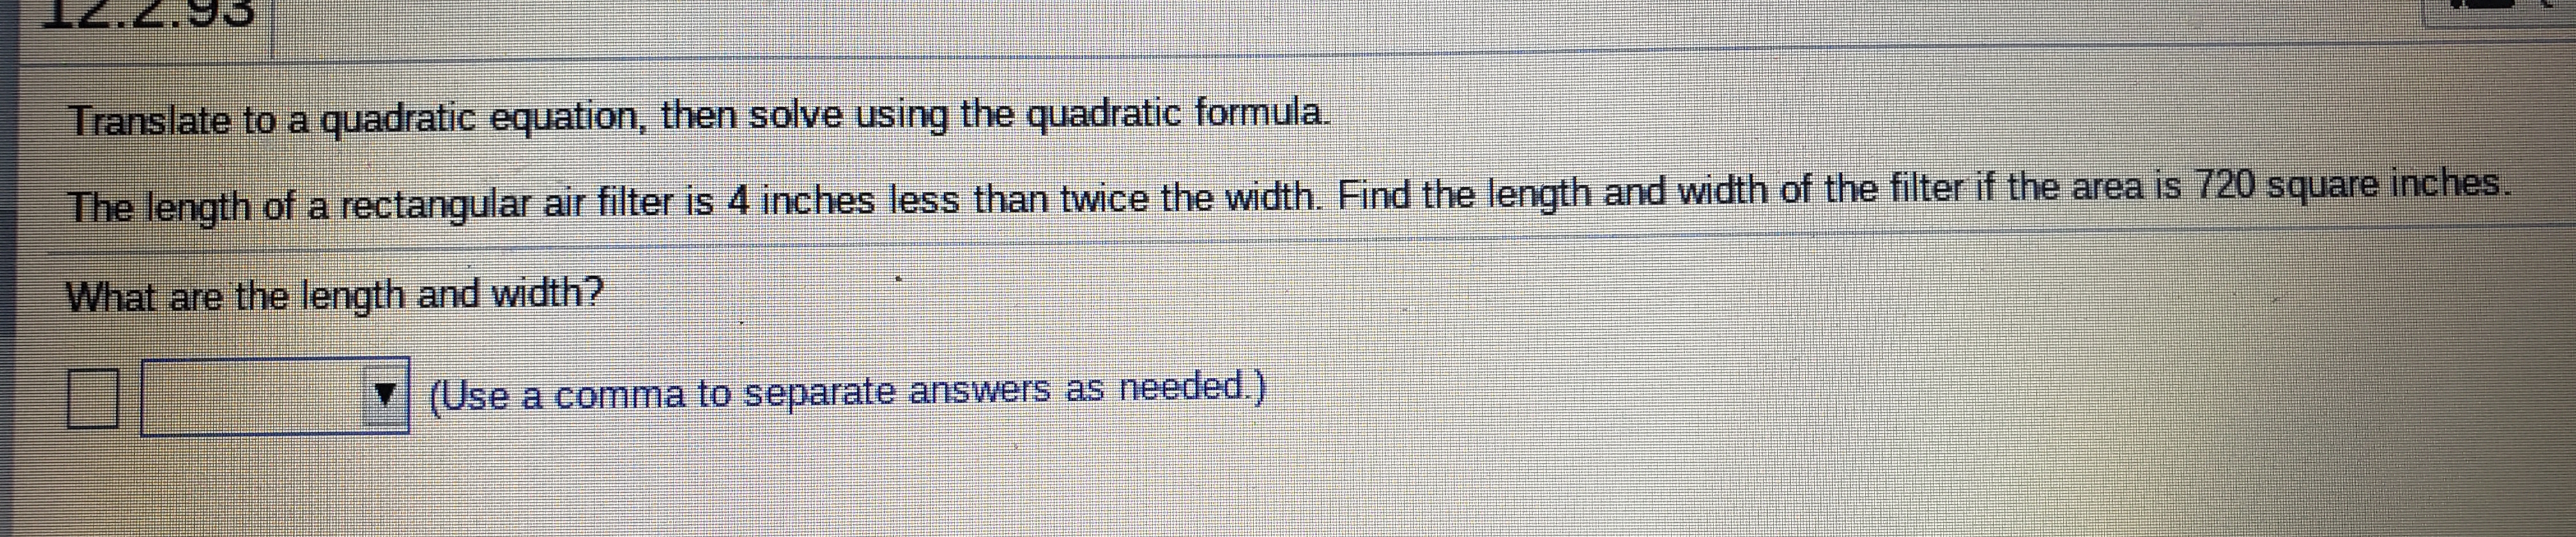 IZ.2.93
Translate to a quadratic equation, then solve using the quadratic formula.
The length of a rectangular air filter is 4 inches less than twice the width. Find the length and width of the filter if the area is 720 square inches.
What are the length and width?
(Use a comma to separate answers as needed.)
